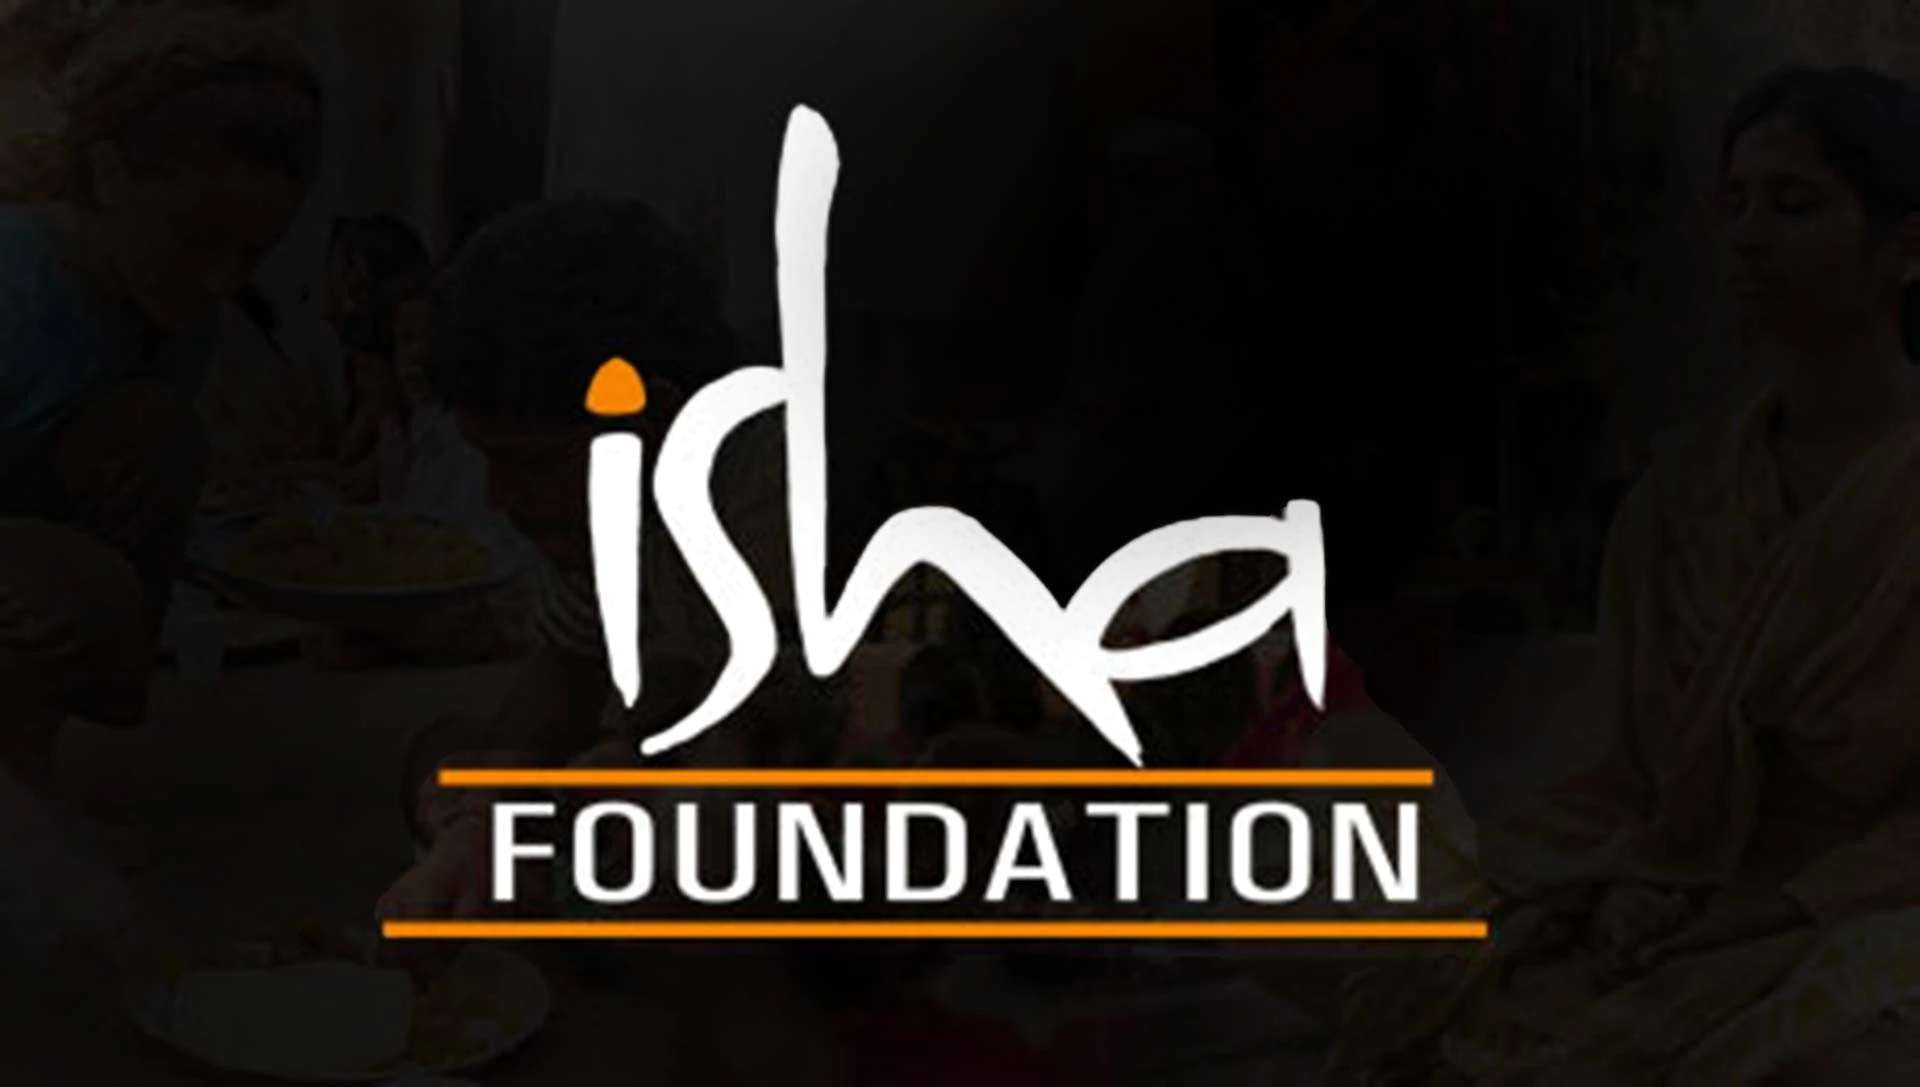 All Buildings at Isha Foundation are Legal